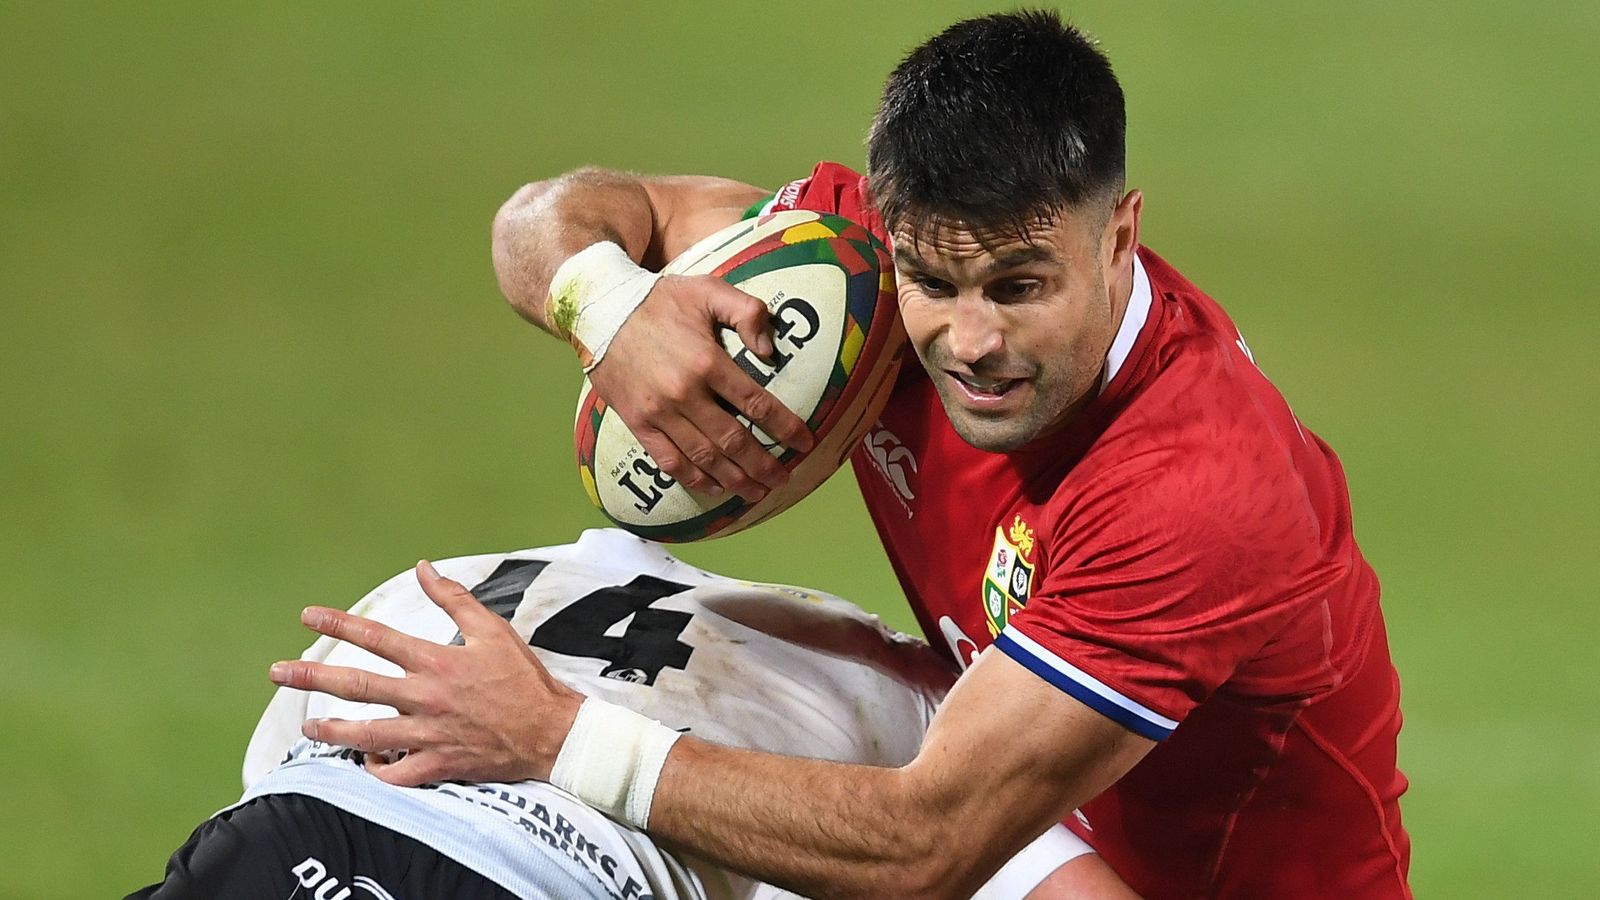 Conor Murray to lead British and Irish Lions vs South Africa ‘A’; Anthony Watson starts at full-back